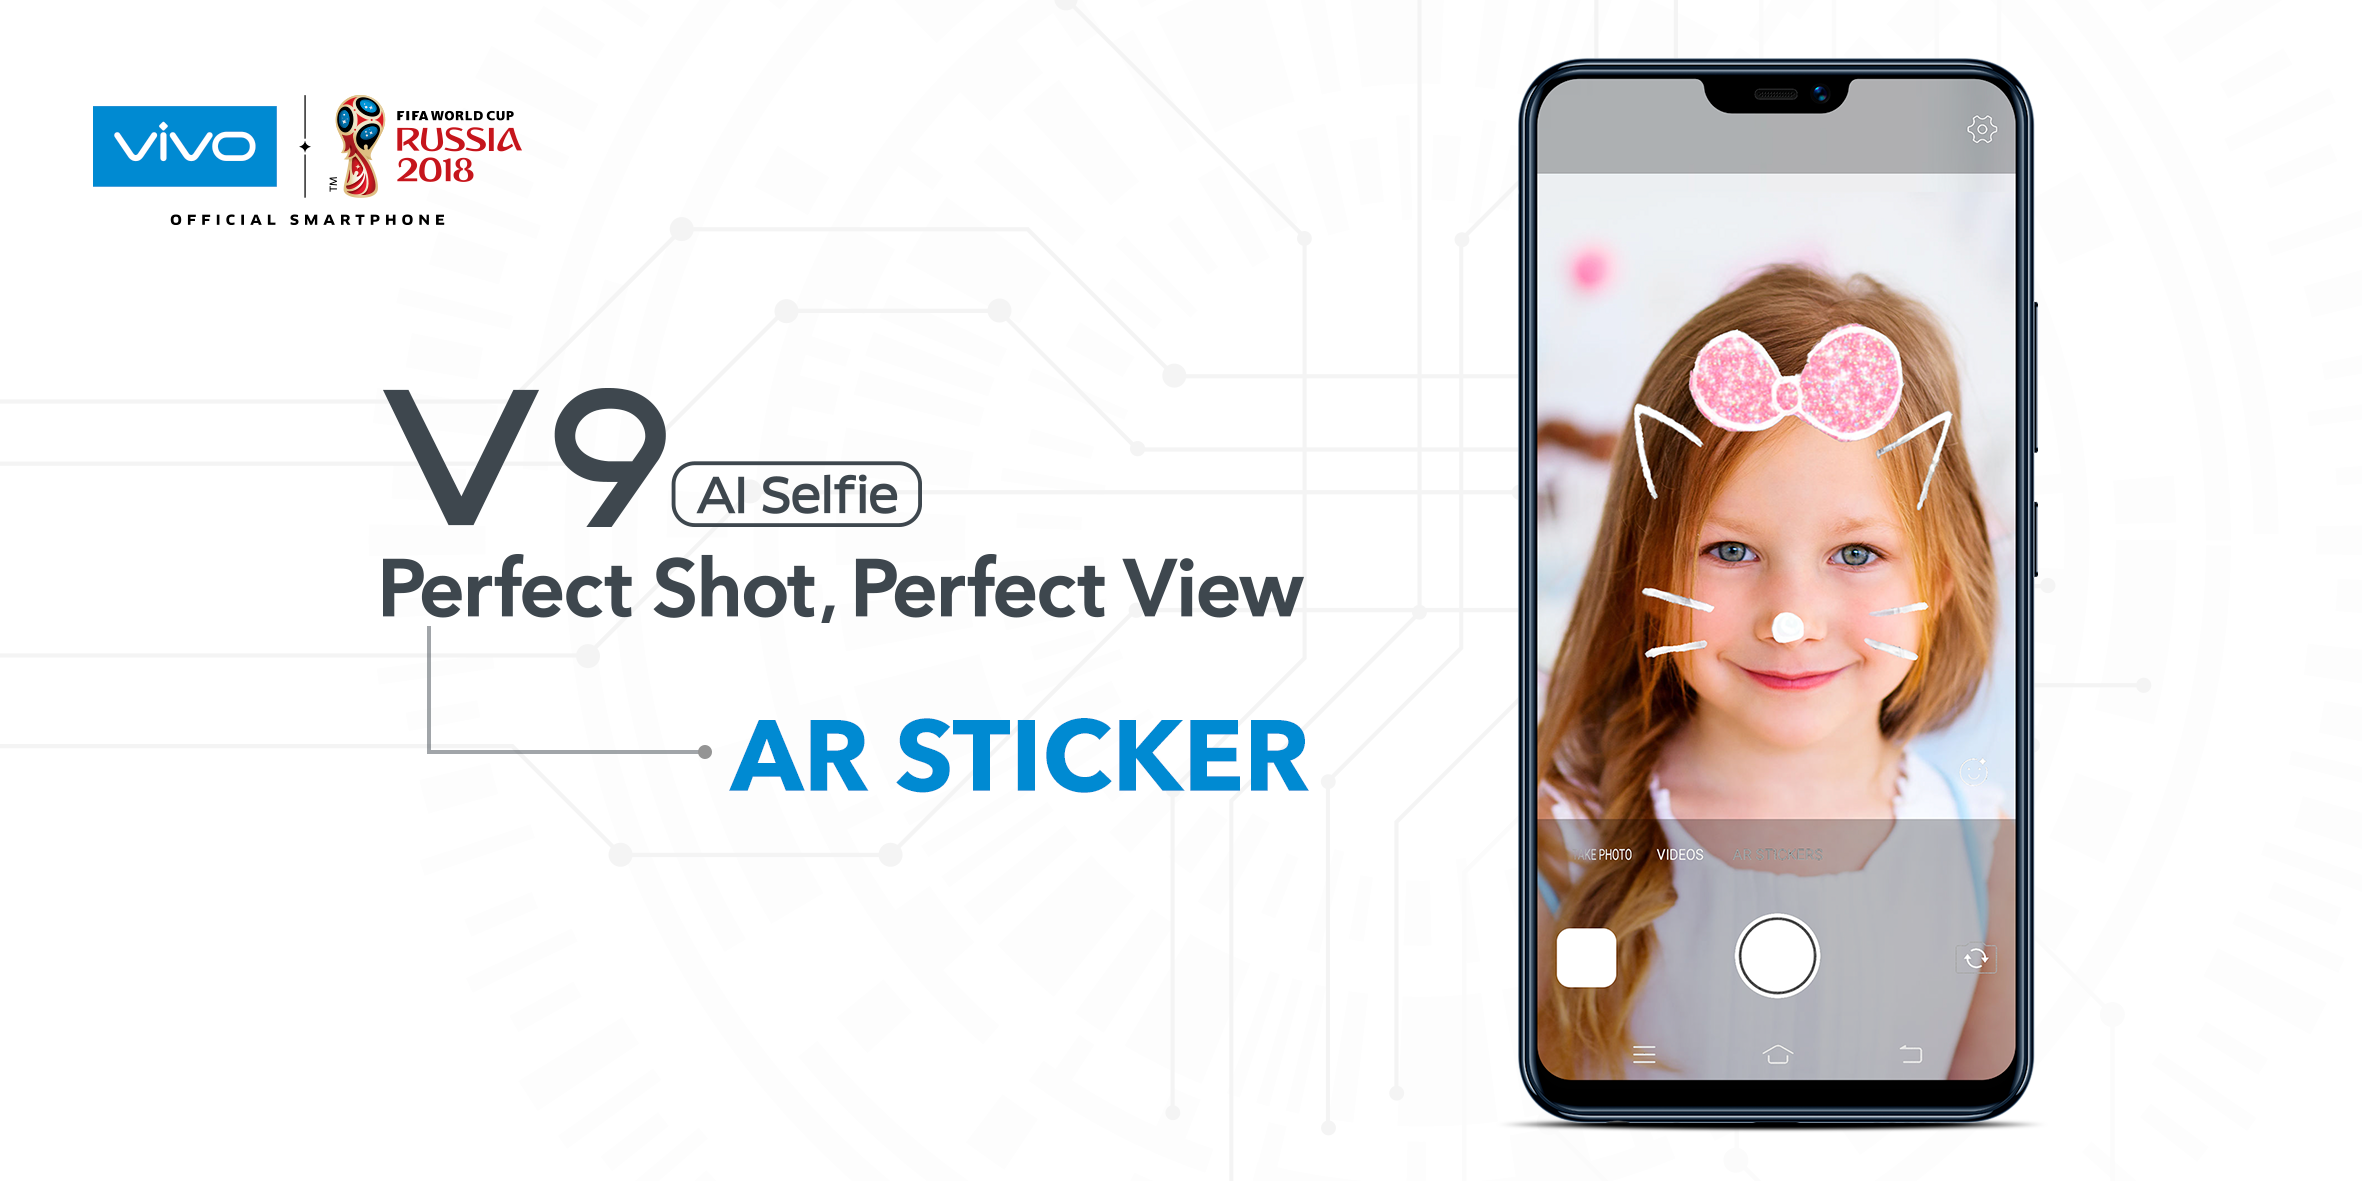 vivo V9 to have AR Sticker feature pre-installed, coming soon on 26 March 2018